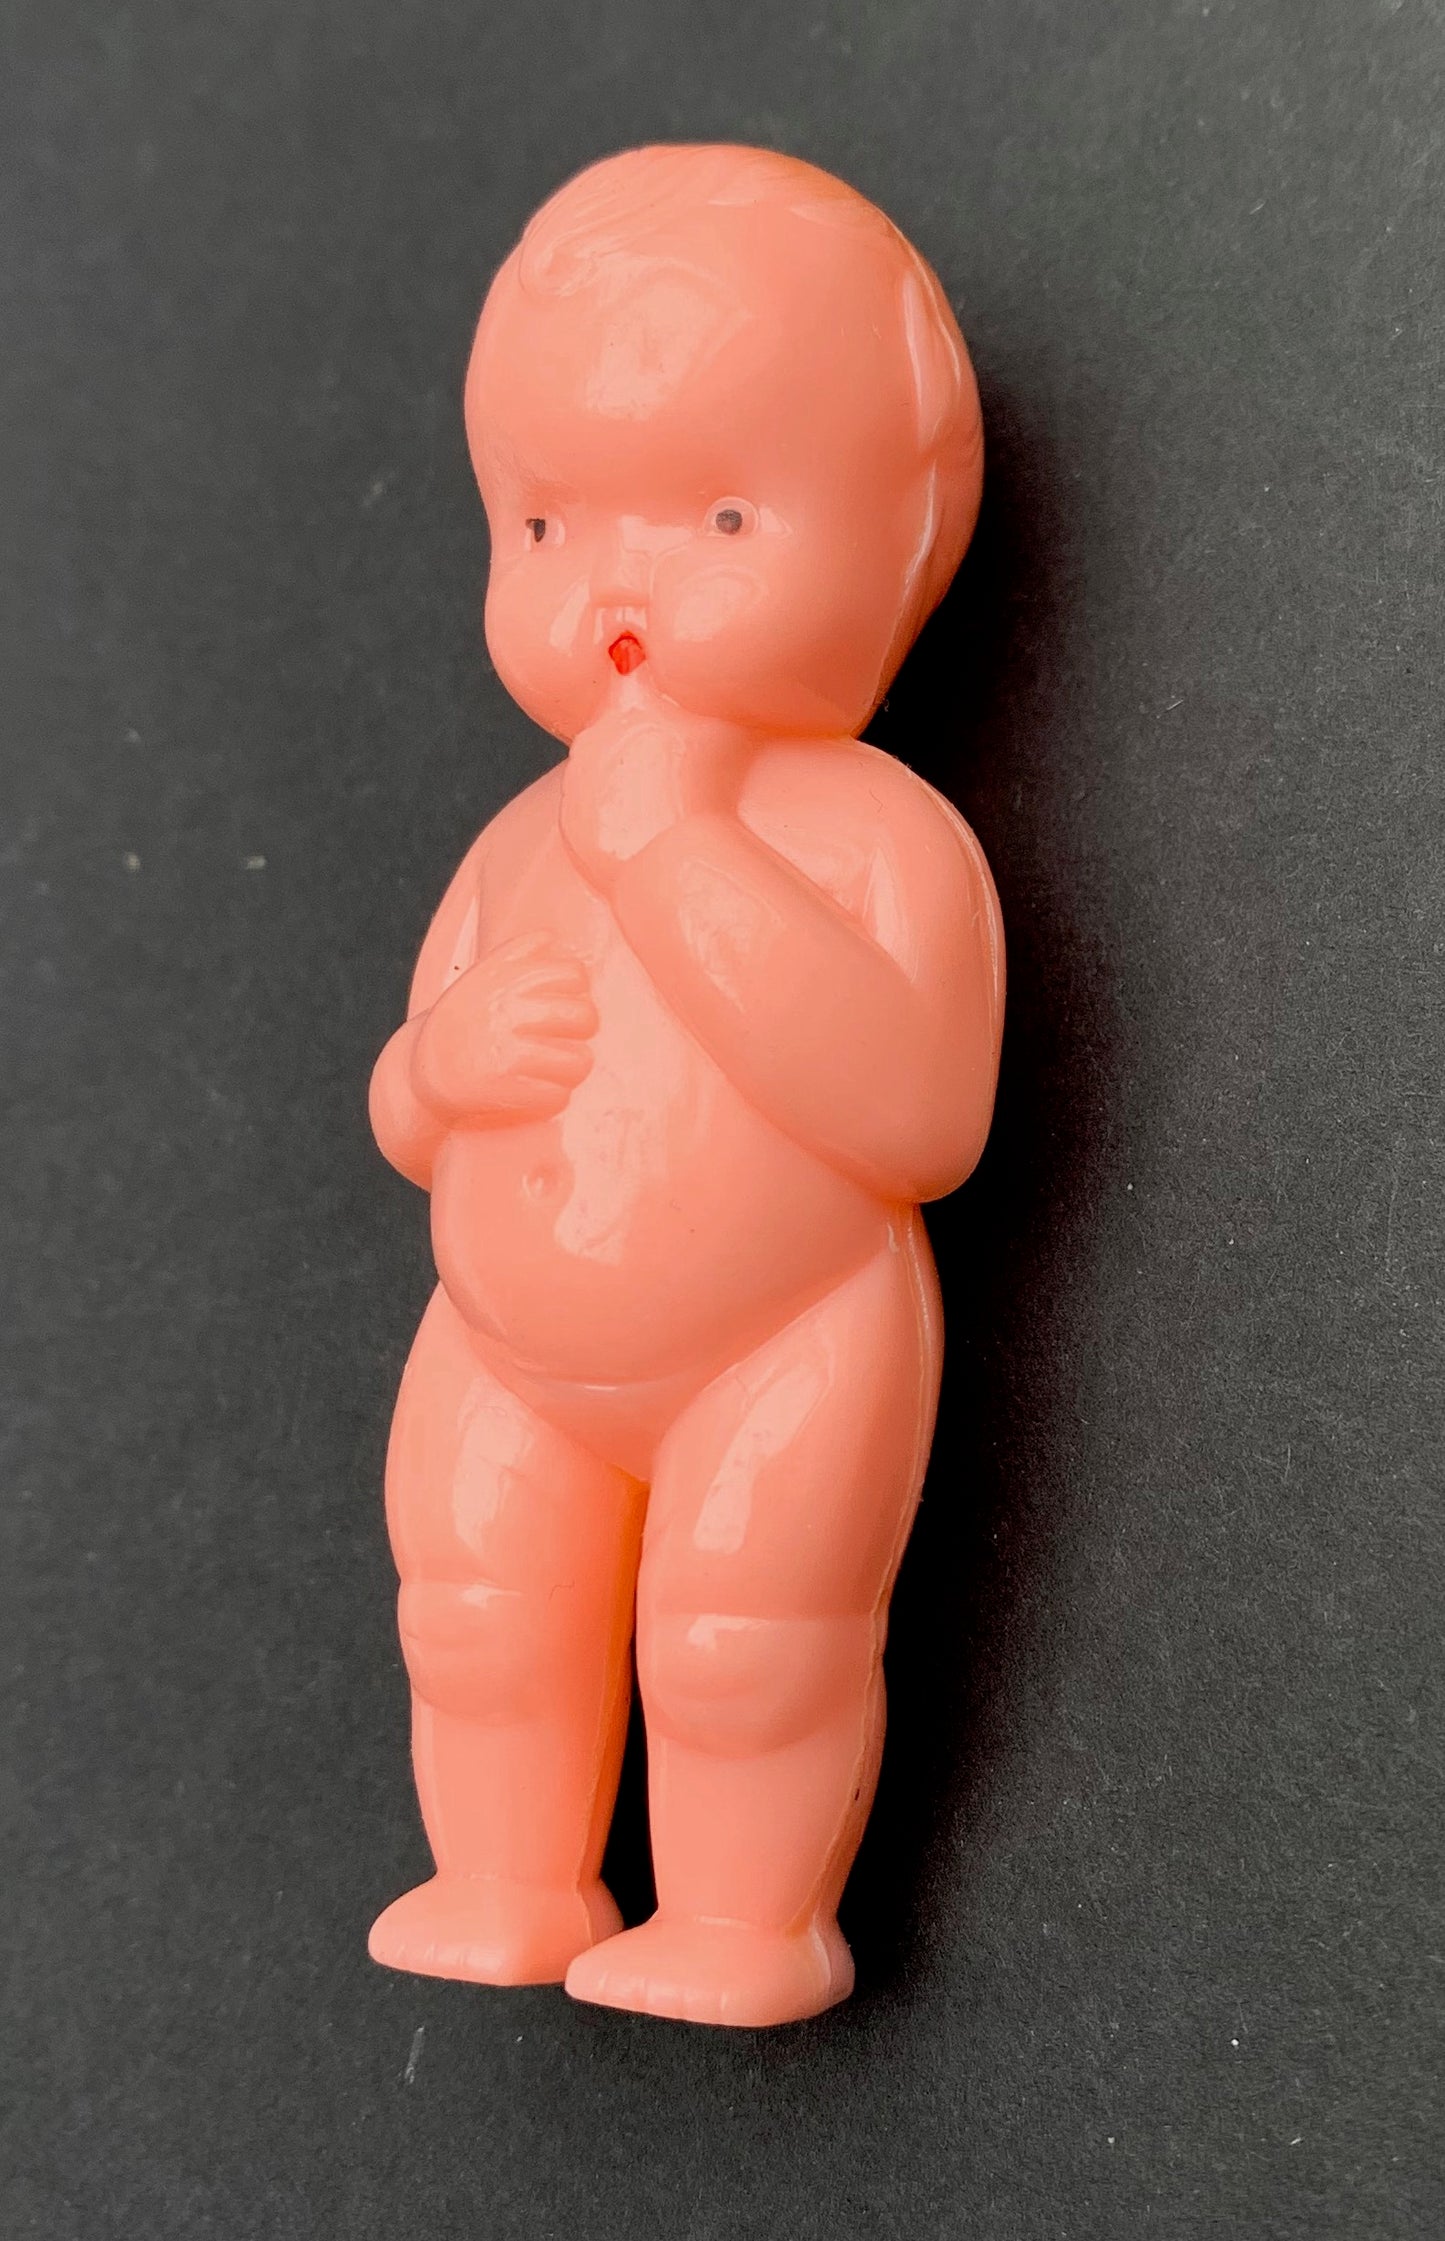 Worried 7cm "RP" Canada 1950s Baby doll